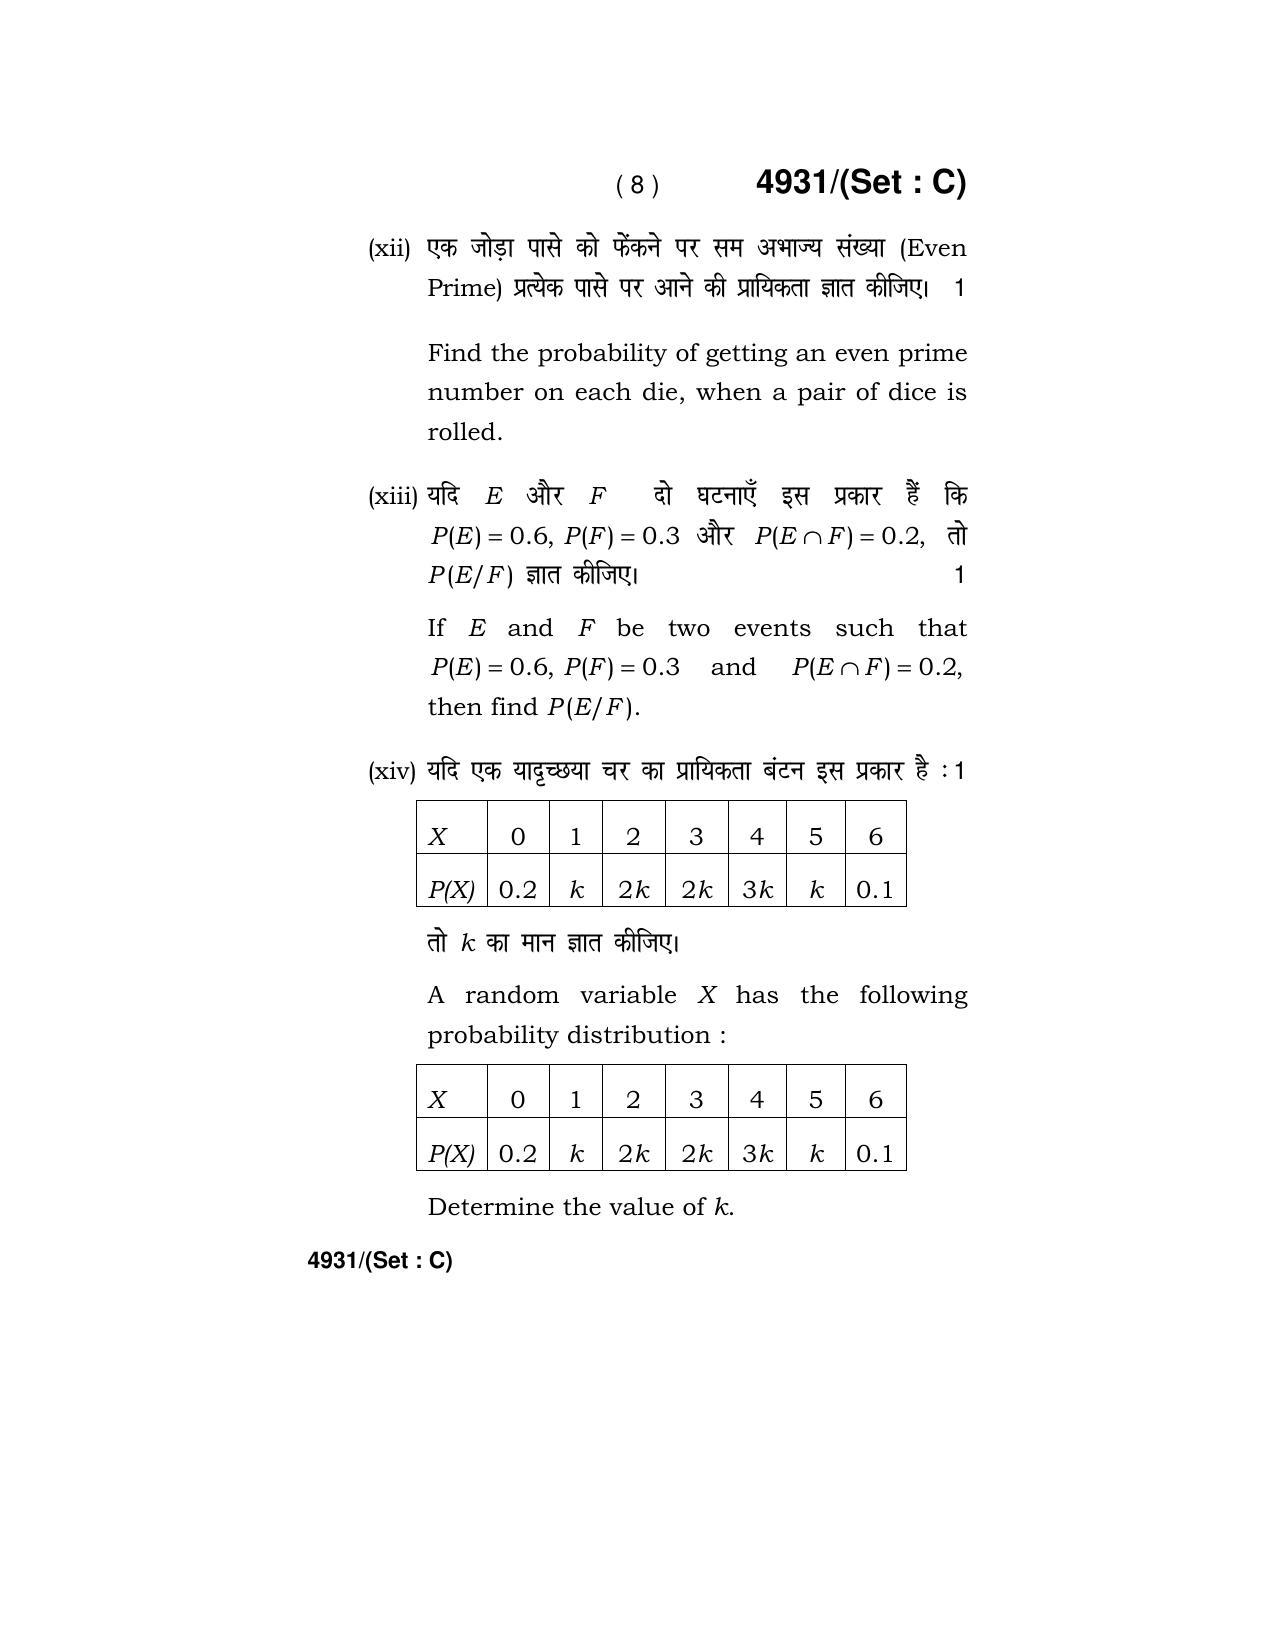 Haryana Board HBSE Class 12 Mathematics 2020 Question Paper - Page 40